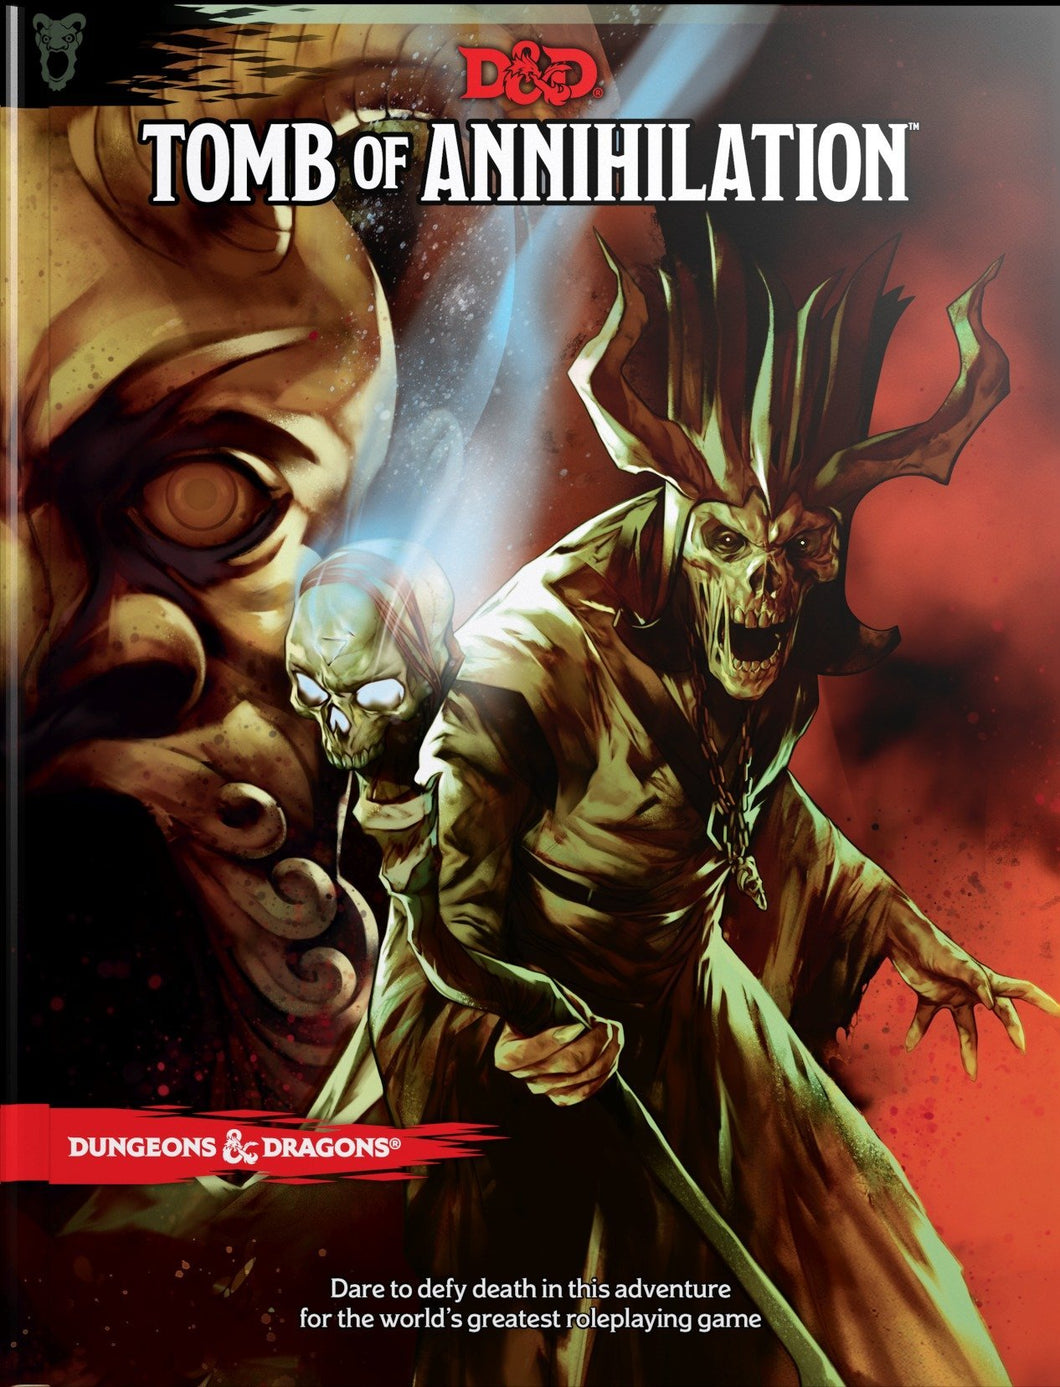 Dungeons & Dragons (D&D) : 5th Edition Tomb of Annihilation